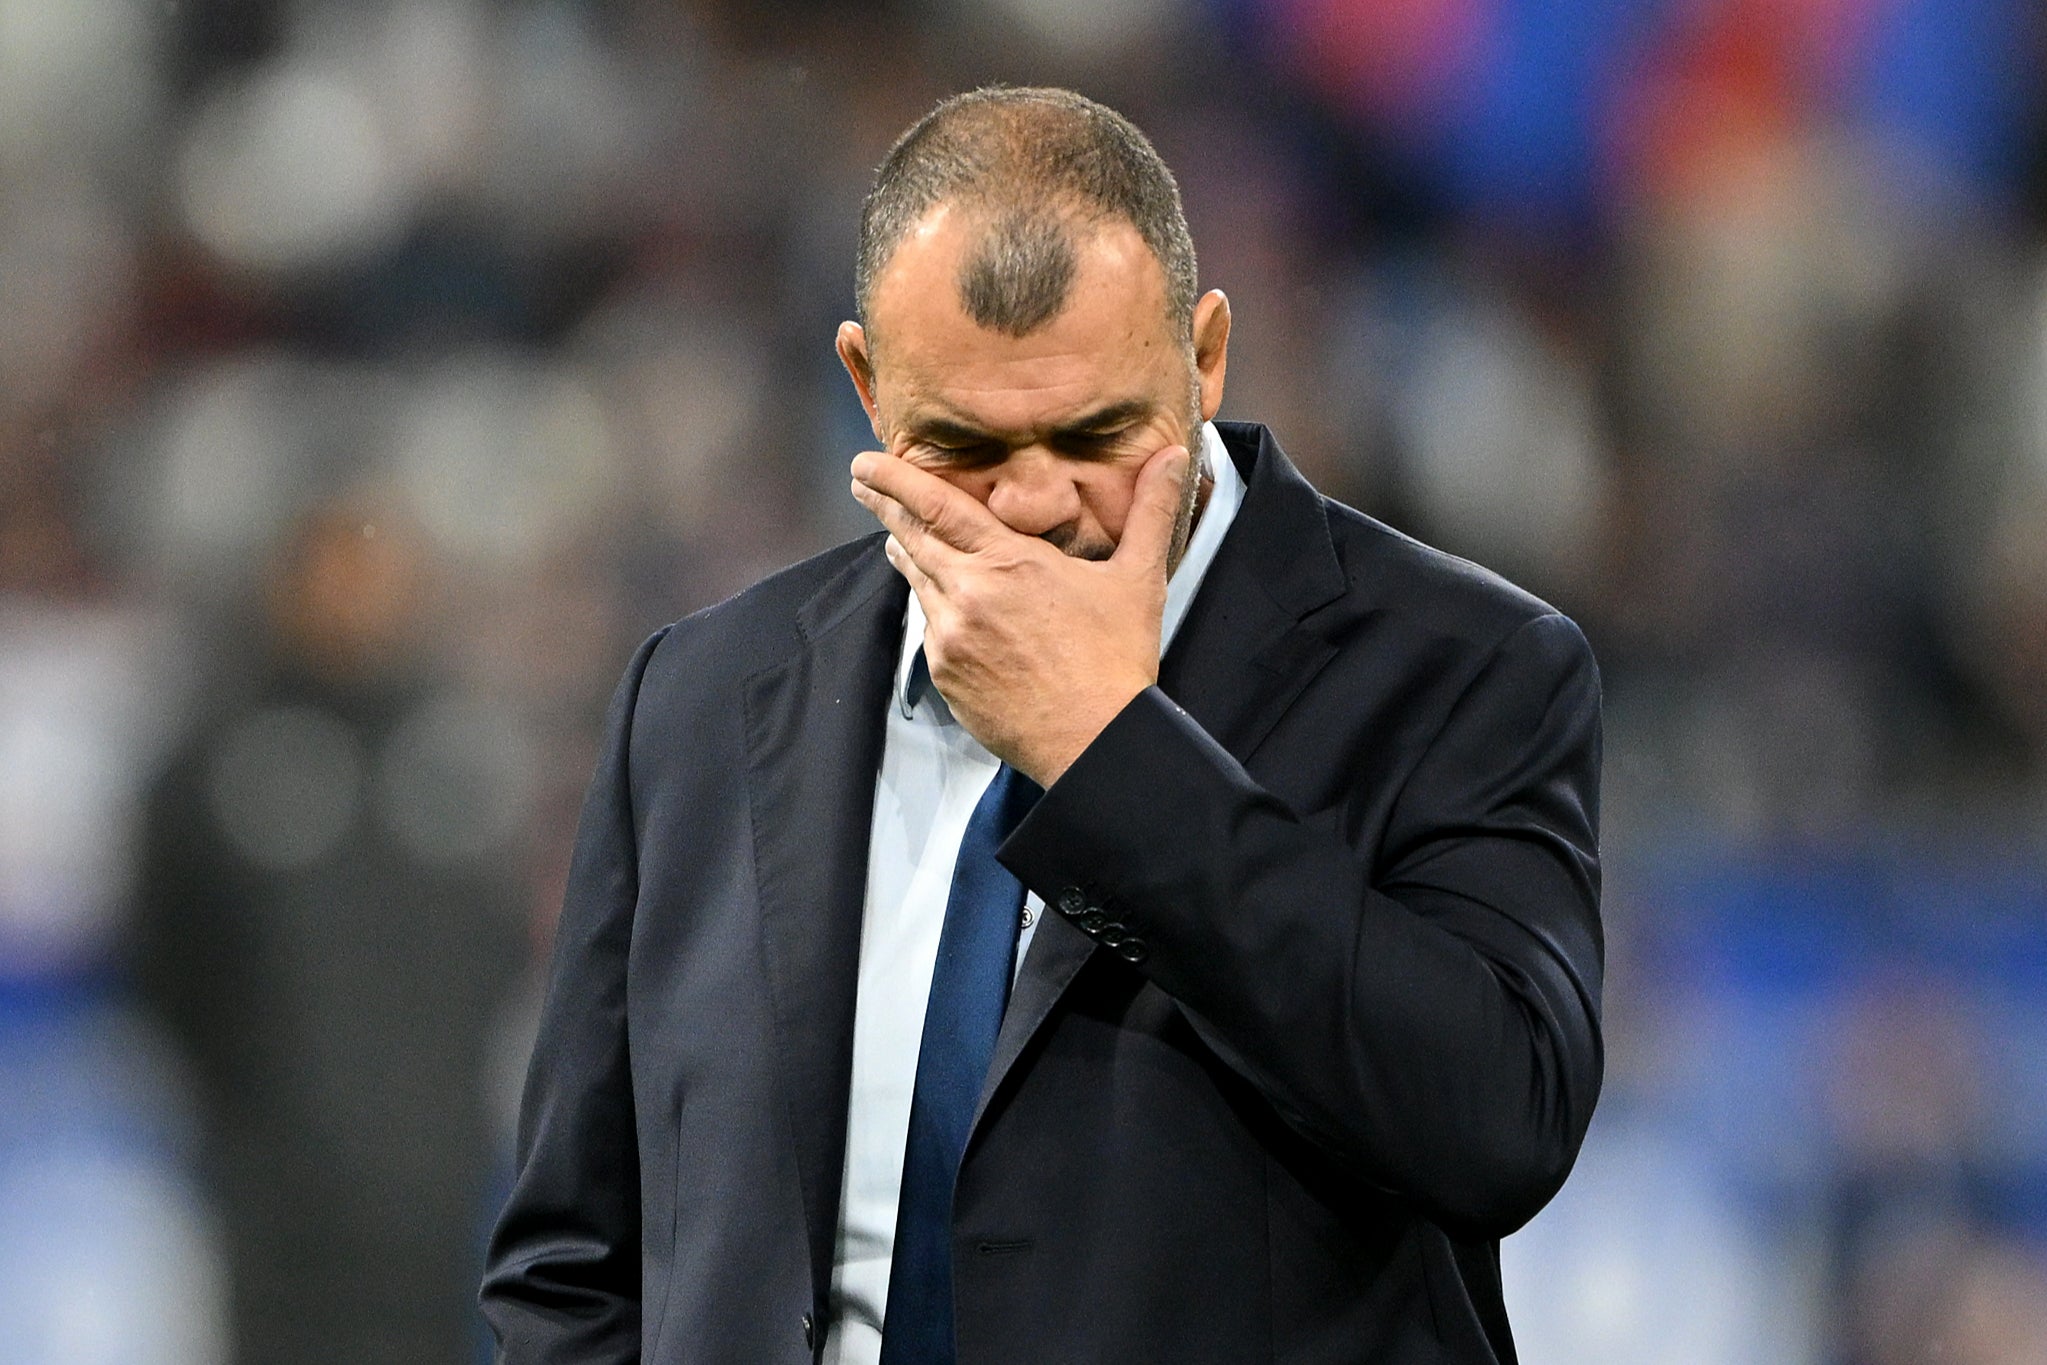 Michael Cheika led Argentina to a World Cup semi-final but they were trounced by New Zealand